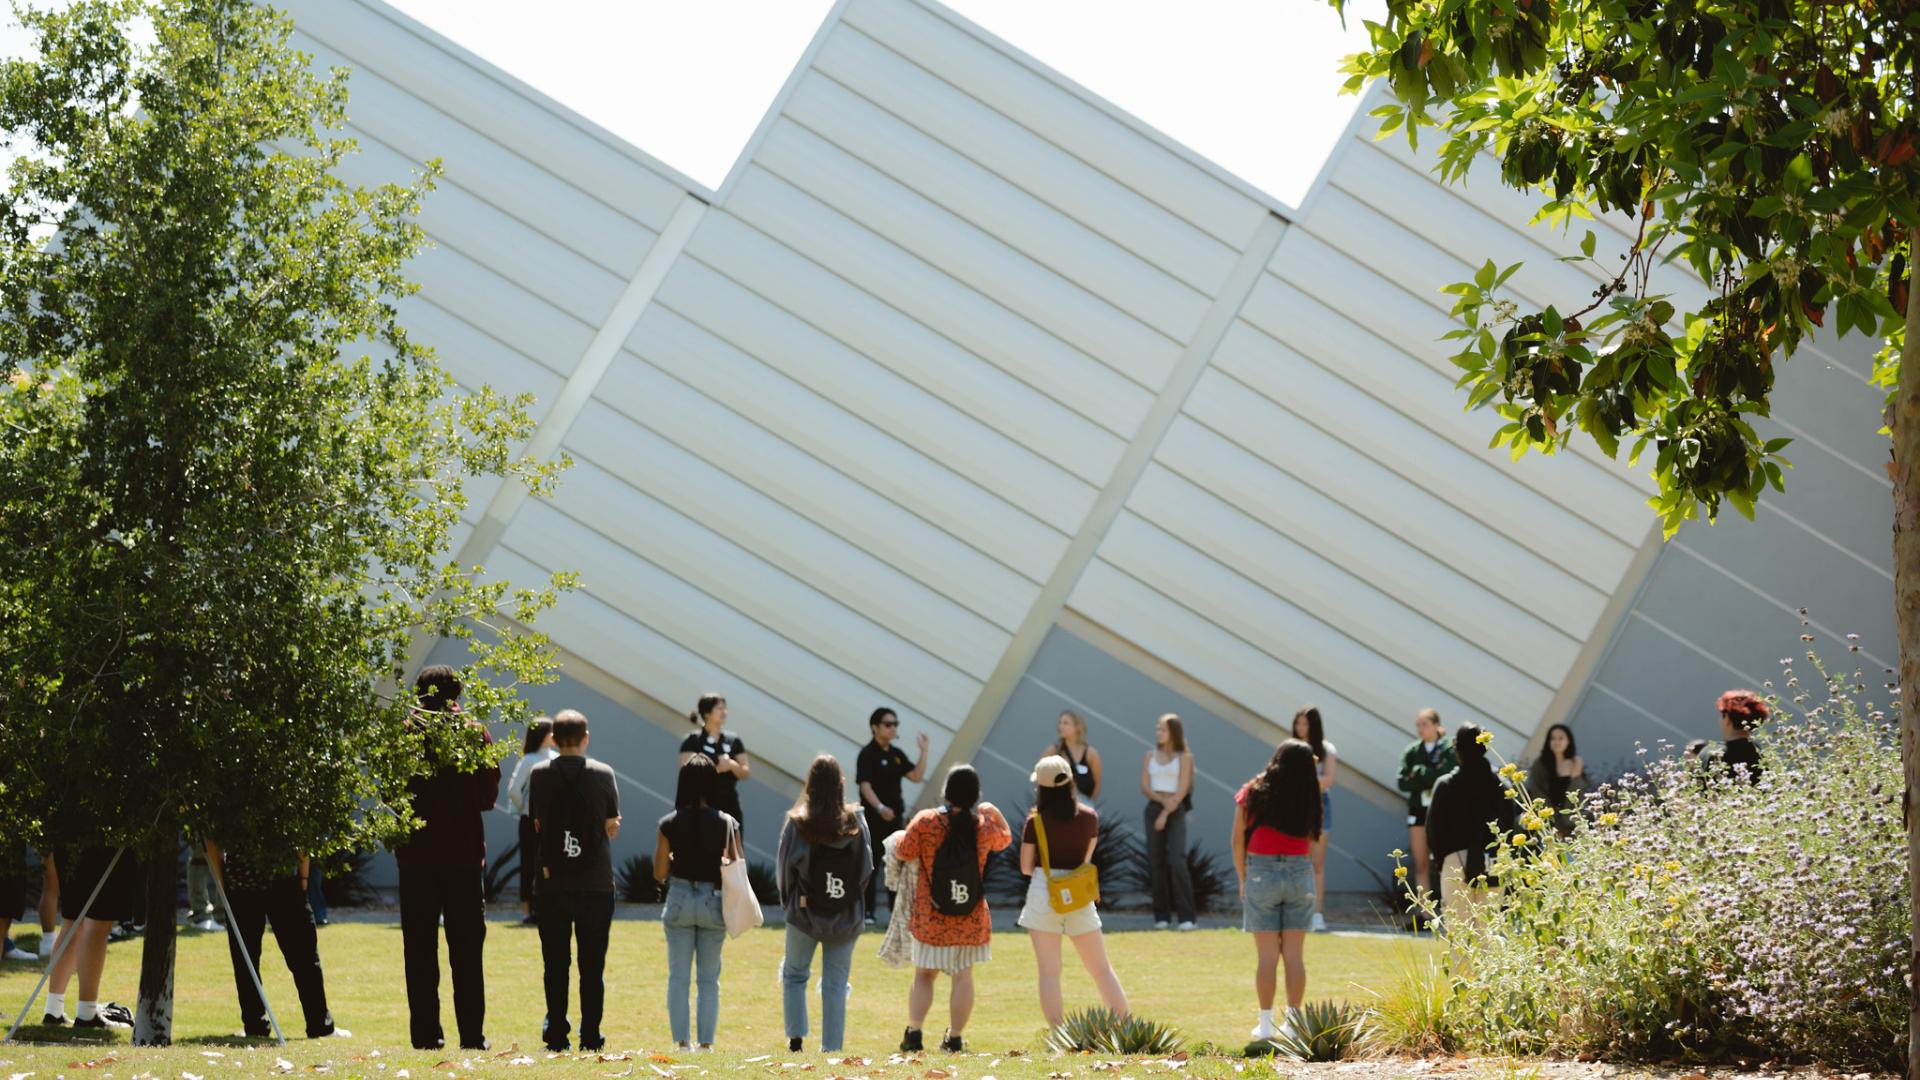 A group of people standing in a semi-circle outdoors, listening to a speaker in front of a modern, angular building.